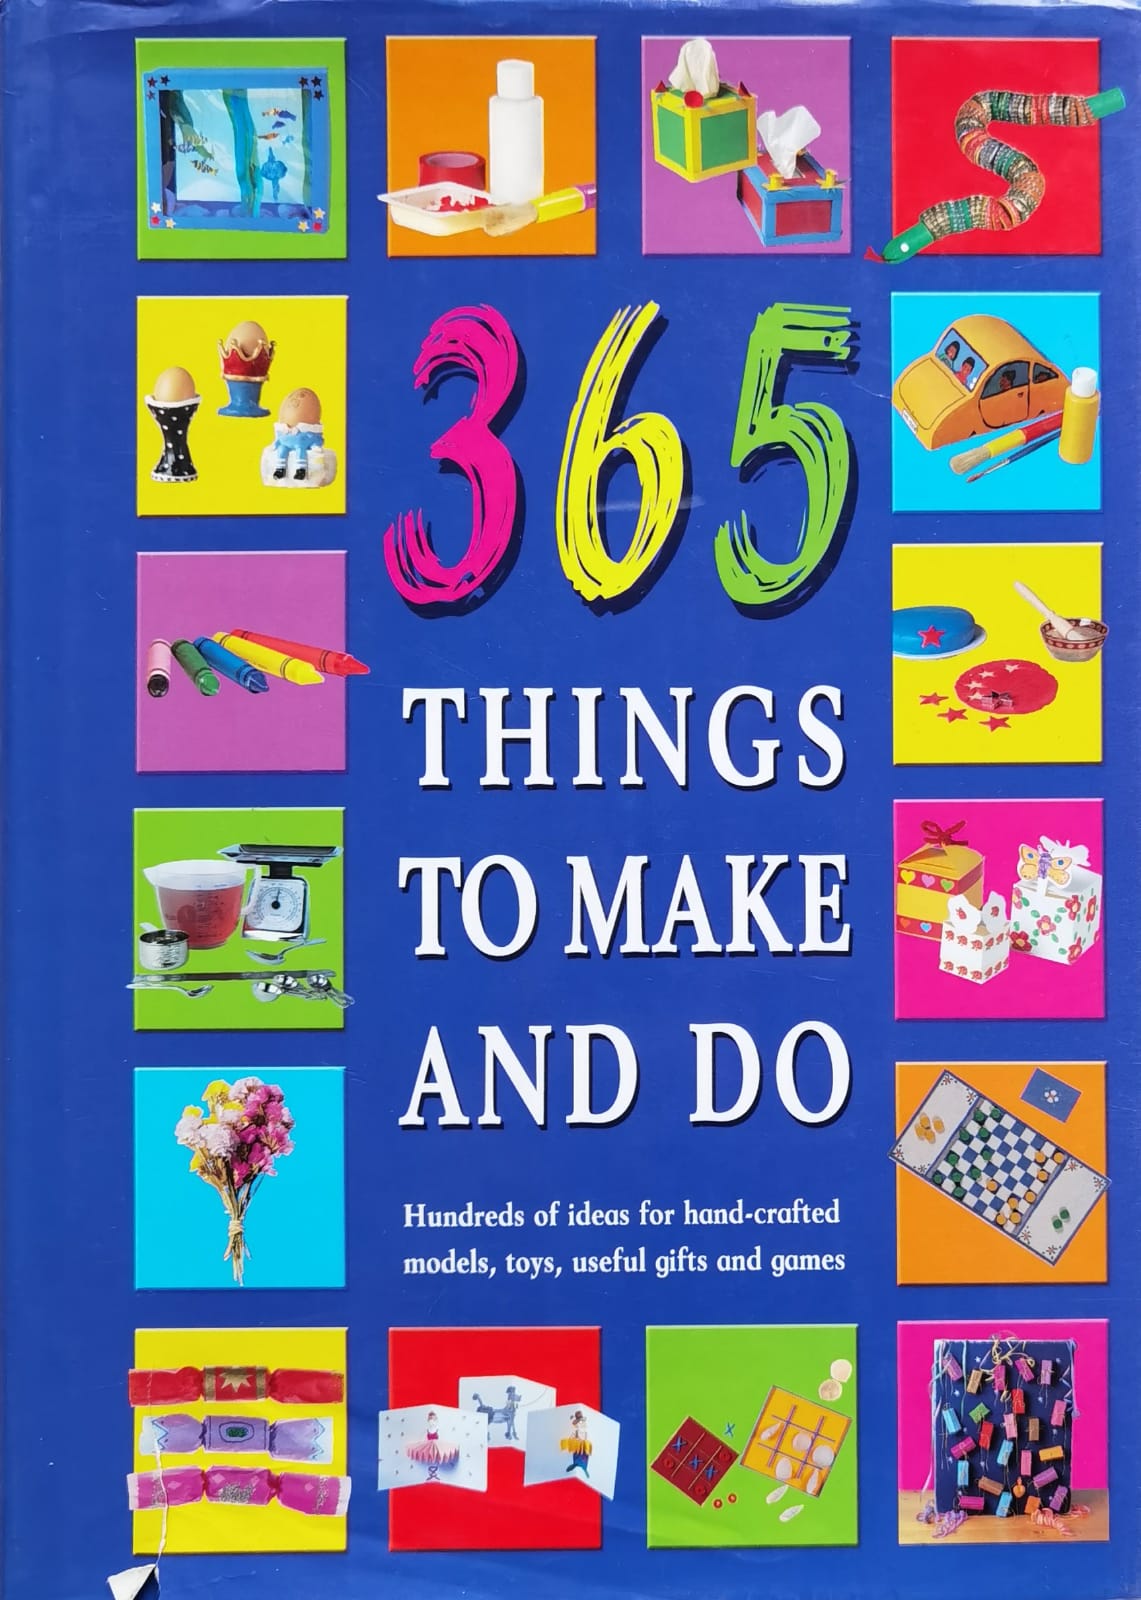 365 things to make and do                                                                            vivienne bolton                                                                                     